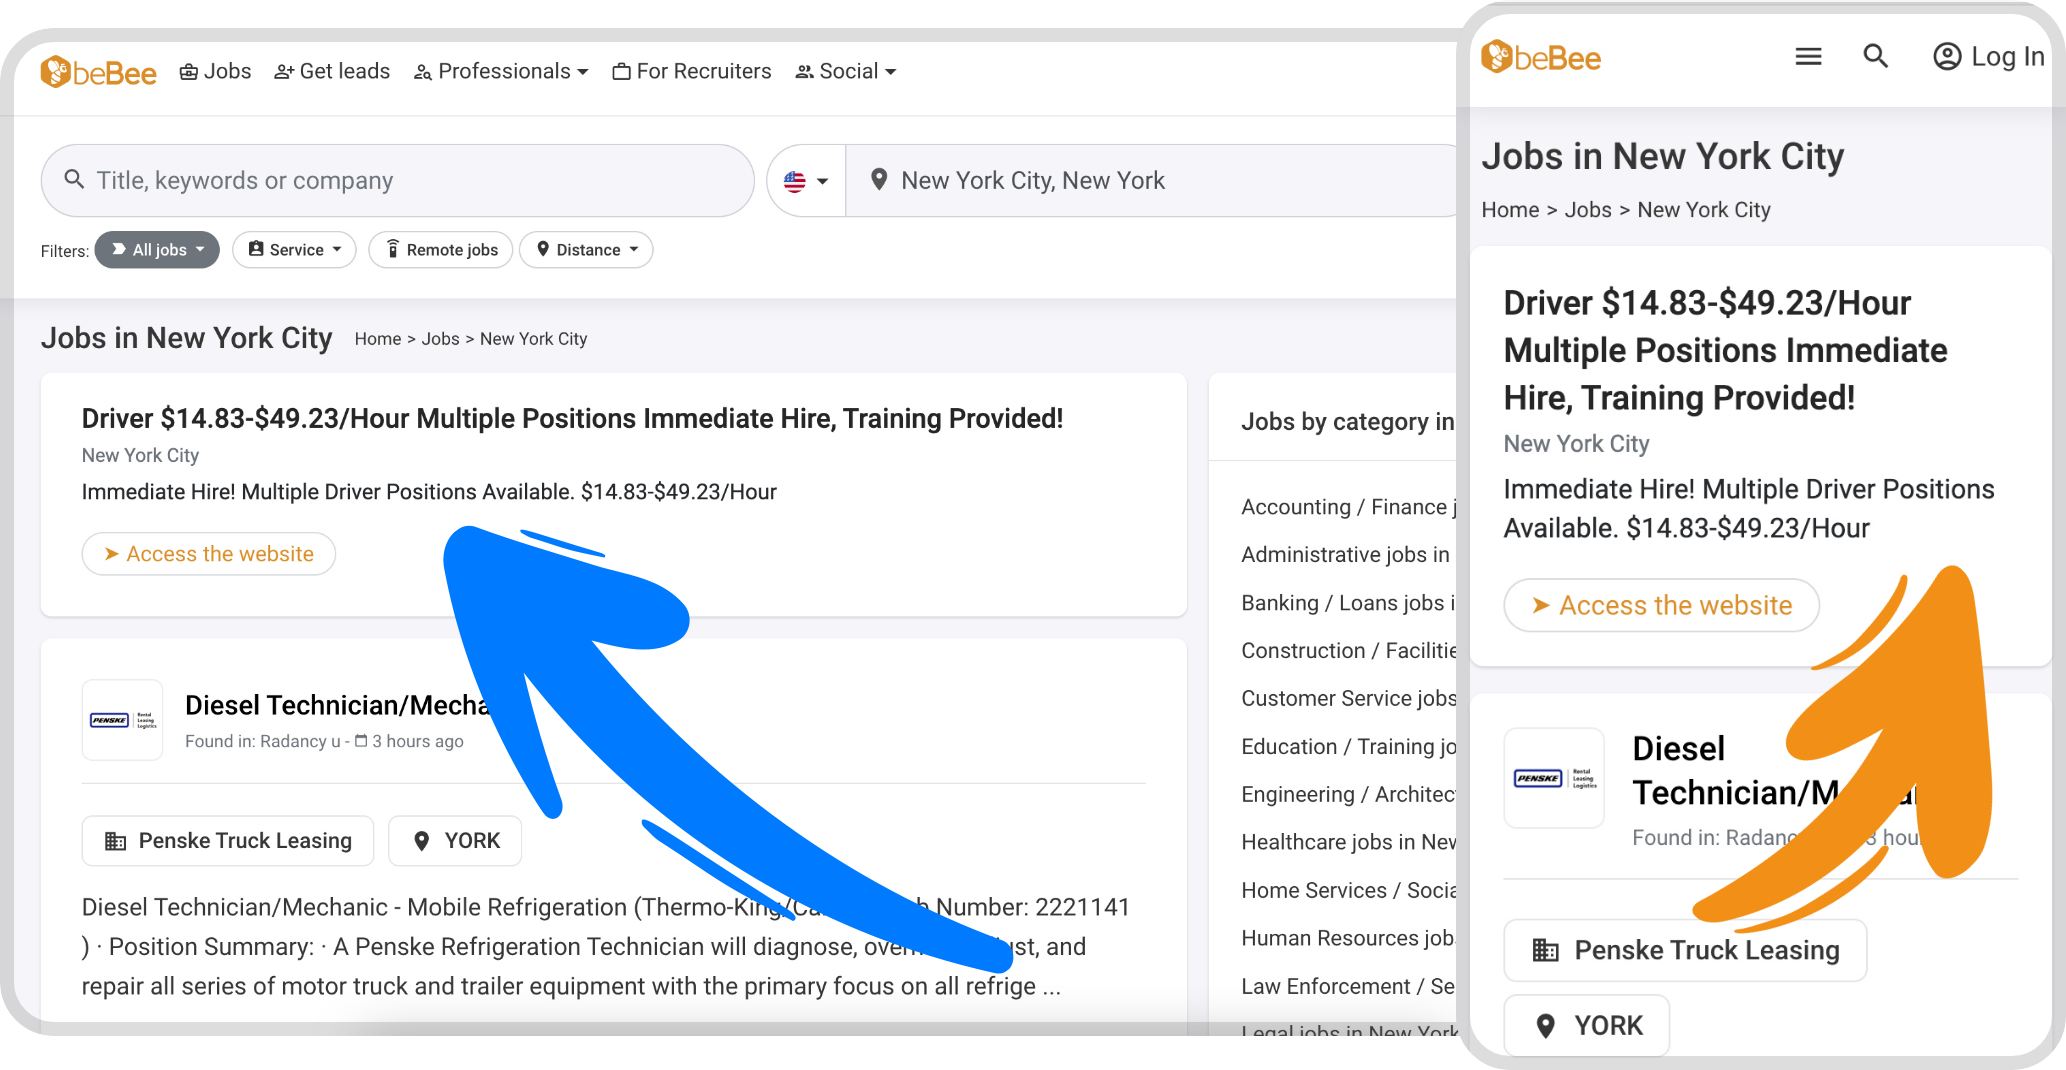 QbeBee @ Jobs &+Getleads 2 Professionals v (For Recruiters 2. Social

Q Title, keywords or company £ +  Q New York City, New York

re: CED 5

T Remotejobs © Distance ~

Jobs in New York City tome > Jobs » New York City

Driver $14.83-$49.23/Hour Multiple Positions Immediate Hire, Training Provided!
New York City
Immediate Hire! Multiple Driver Positions Available. $14.83-$49.23/Hour

  
  
     
 

Diesel Technician/Mech

Found in Radancy u- 0 3 h

=

fit

 

rs ago

BB Penske Truck Leasing Q YORK

umber: 2221141
st, and

Diesel Technician/Mechanic - Mobile Refrigeration (Thermo-
) - Position Summary: - A Penske Refrigeration Technician will diagnose, 0!
repair all series of motor truck and trailer equipment with the primary focus on all refrige ...

Jobs by category in

Accounting / Finance |
Administrative jobs in
Banking / Loans jobs 1
Construction / Facilitie
Customer Service jobs
Education / Training jc
Engineering / Architec
Healthcare jobs in Nev
Home Services / Socic
Human Resources job

Law Enforcement / Se

Lanalinhe in Naw Varl

©beBee = Q @login

Jobs in New York City

Home > Jobs > New York City

Driver $14.83-$49.23/Hour
Multiple Positions Immediate

Hire, Training Provided!
New York City

Immediate Hire! Multiple Driver Positions
Available. $14.83-$49.23/Hour

  
    
   
  

» Access the website

Diesel

Found in: Rada

EB) Penske Truck Leasing

9 YORK